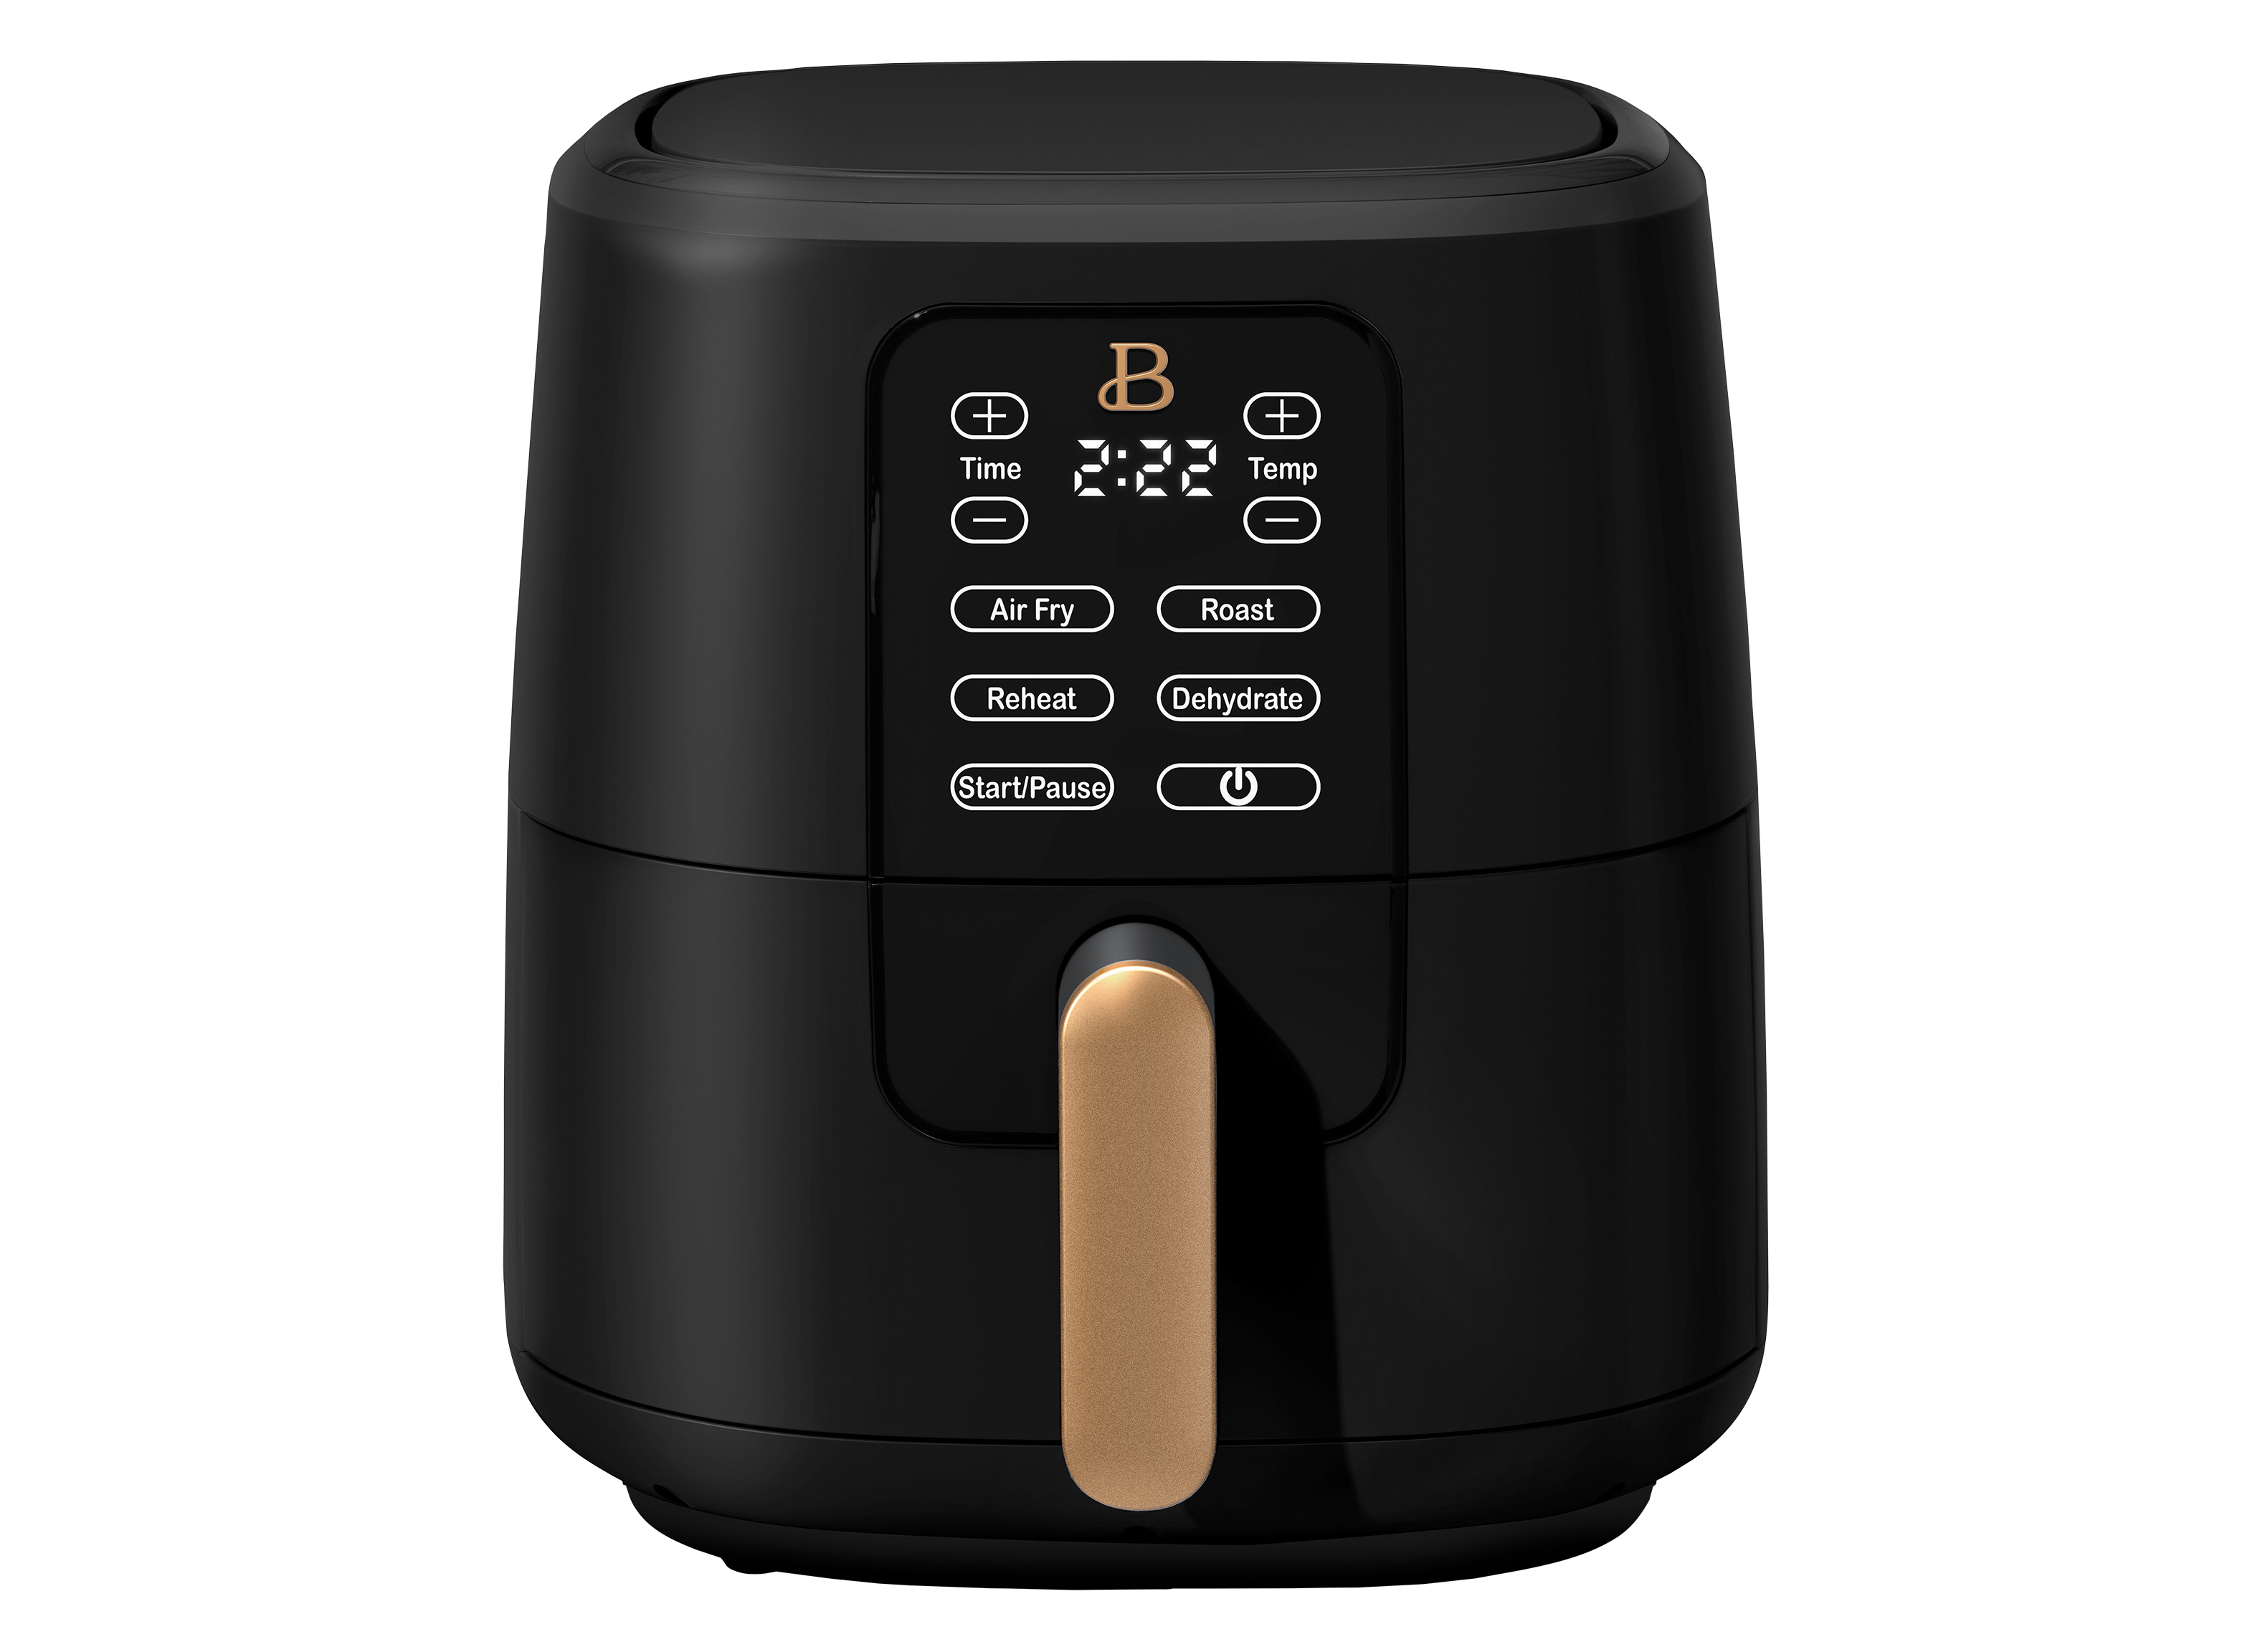 https://crdms.images.consumerreports.org/prod/products/cr/models/404457-air-fryers-beautiful-by-drew-barrymore-quart-touchscreen-air-fryer-10023065.png